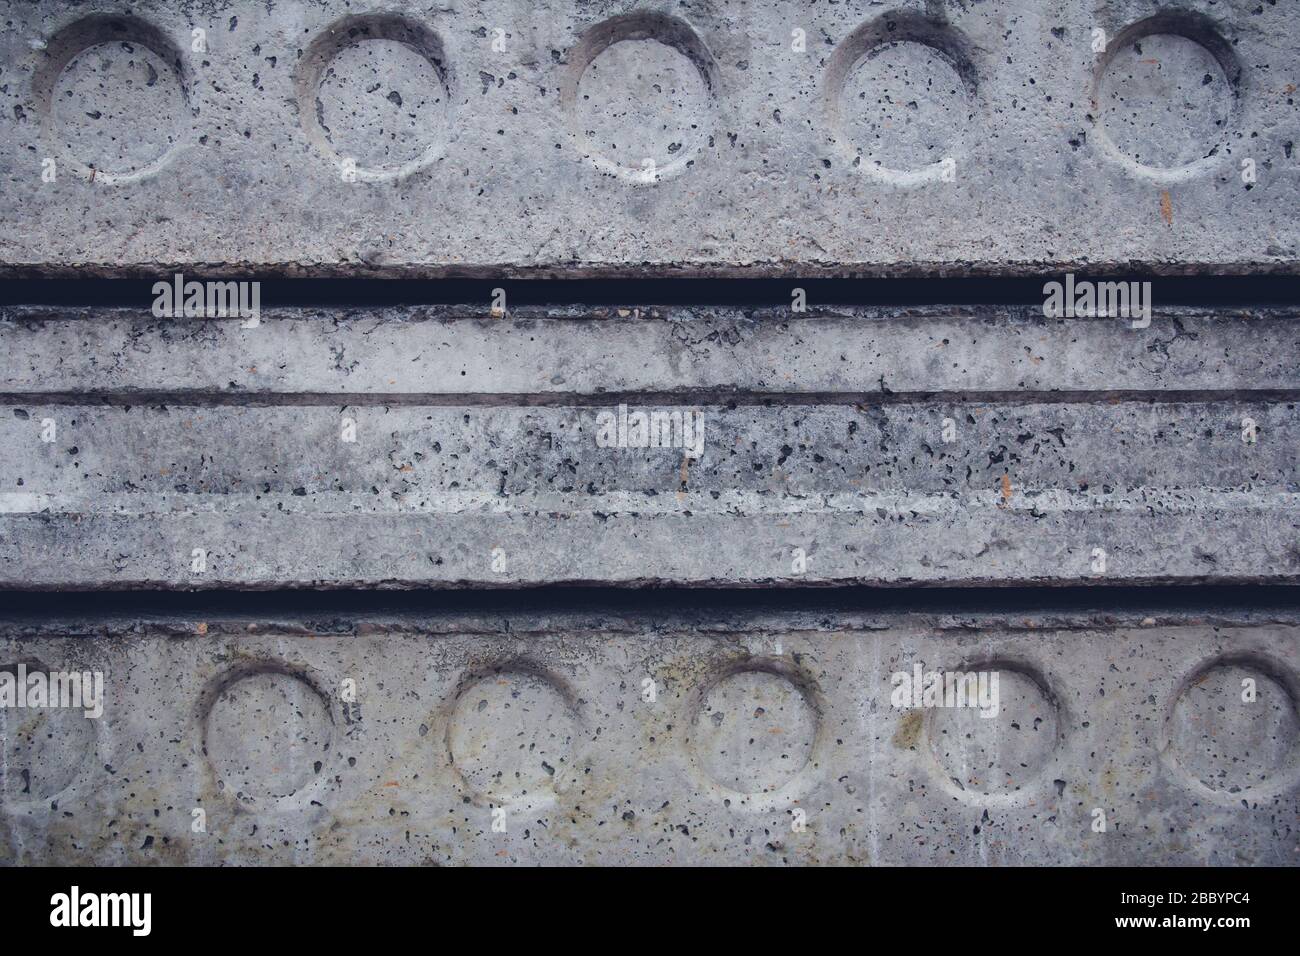 New concrete blocks at a construction site. Construction material Stock Photo